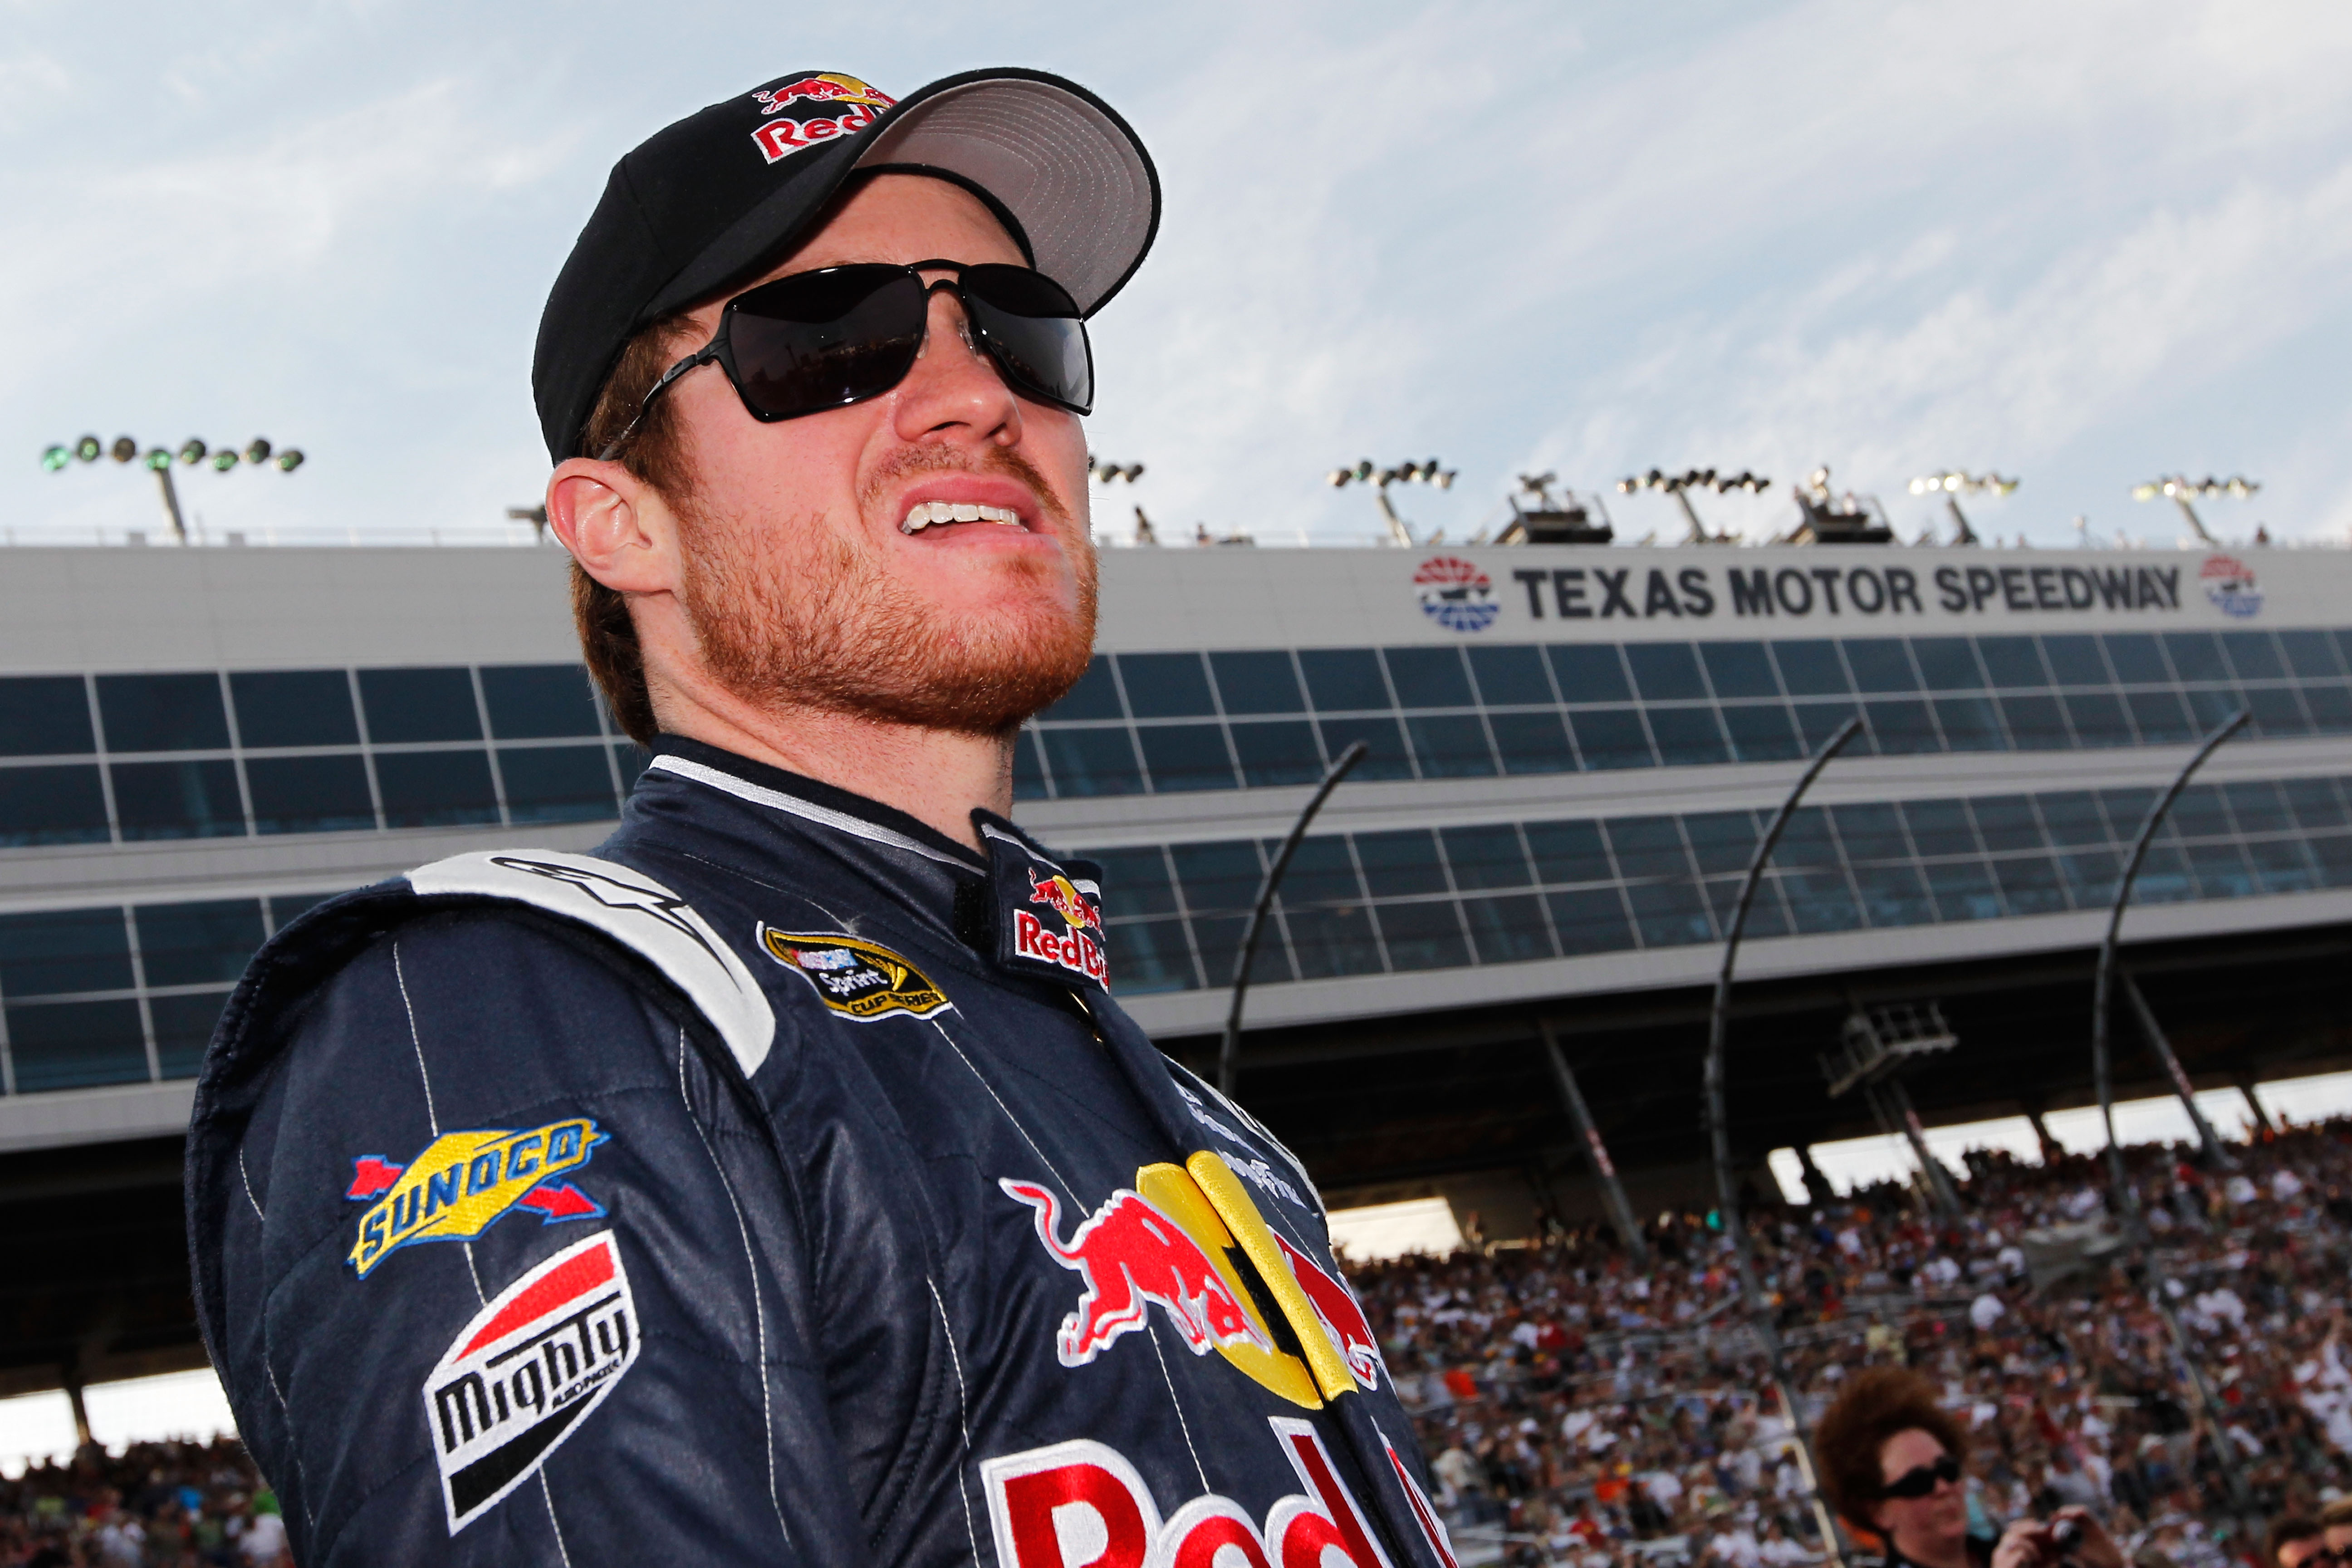 FORT WORTH, TX - APRIL 09:  Brian Vickers, driver of the #83 Red Bull Toyota, stands on the grid prior to the NASCAR Sprint Cup Series Samsung Mobile 500 at Texas Motor Speedway on April 9, 2011 in Fort Worth, Texas.  (Photo by Tom Pennington/Getty Images